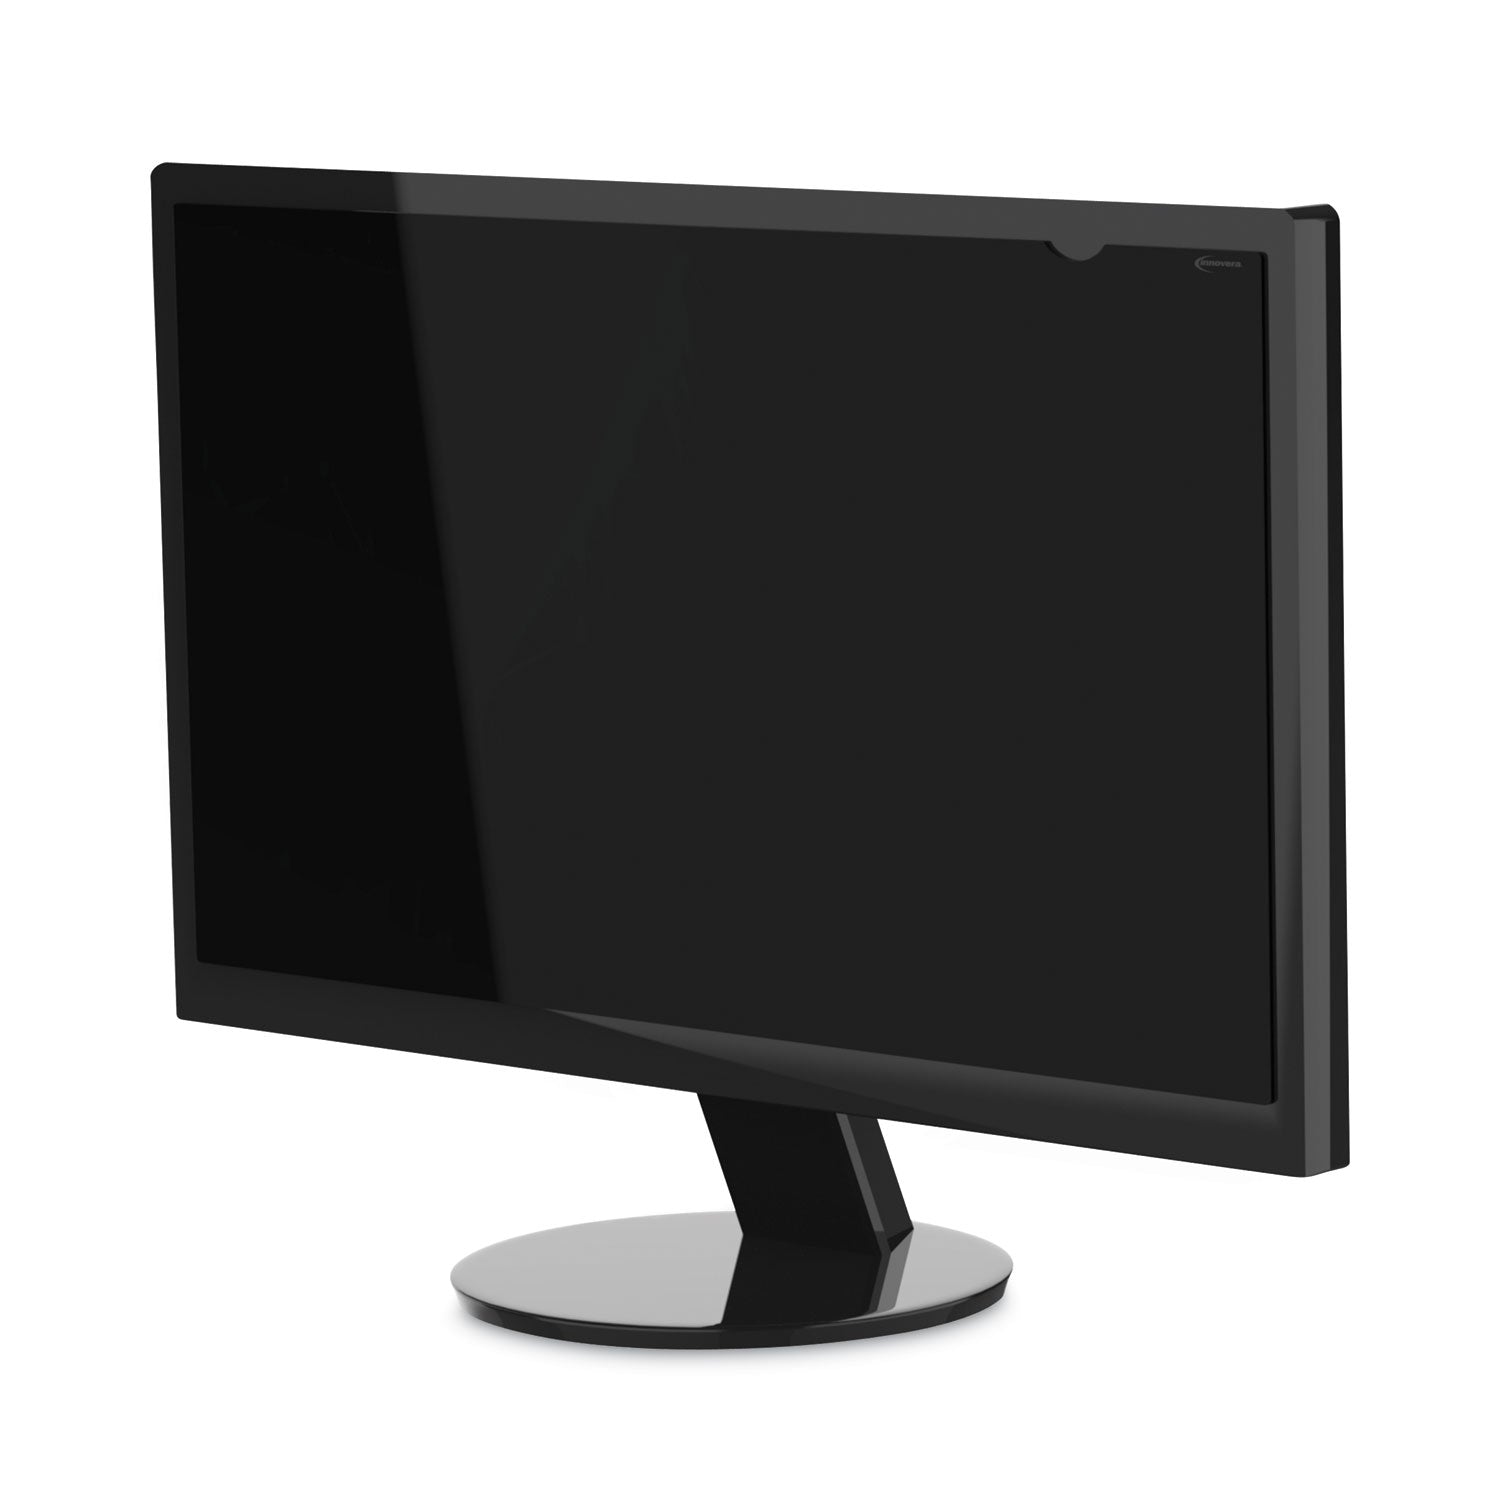 Blackout Privacy Filter for 20" Widescreen Flat Panel Monitor, 16:9 Aspect Ratio - 